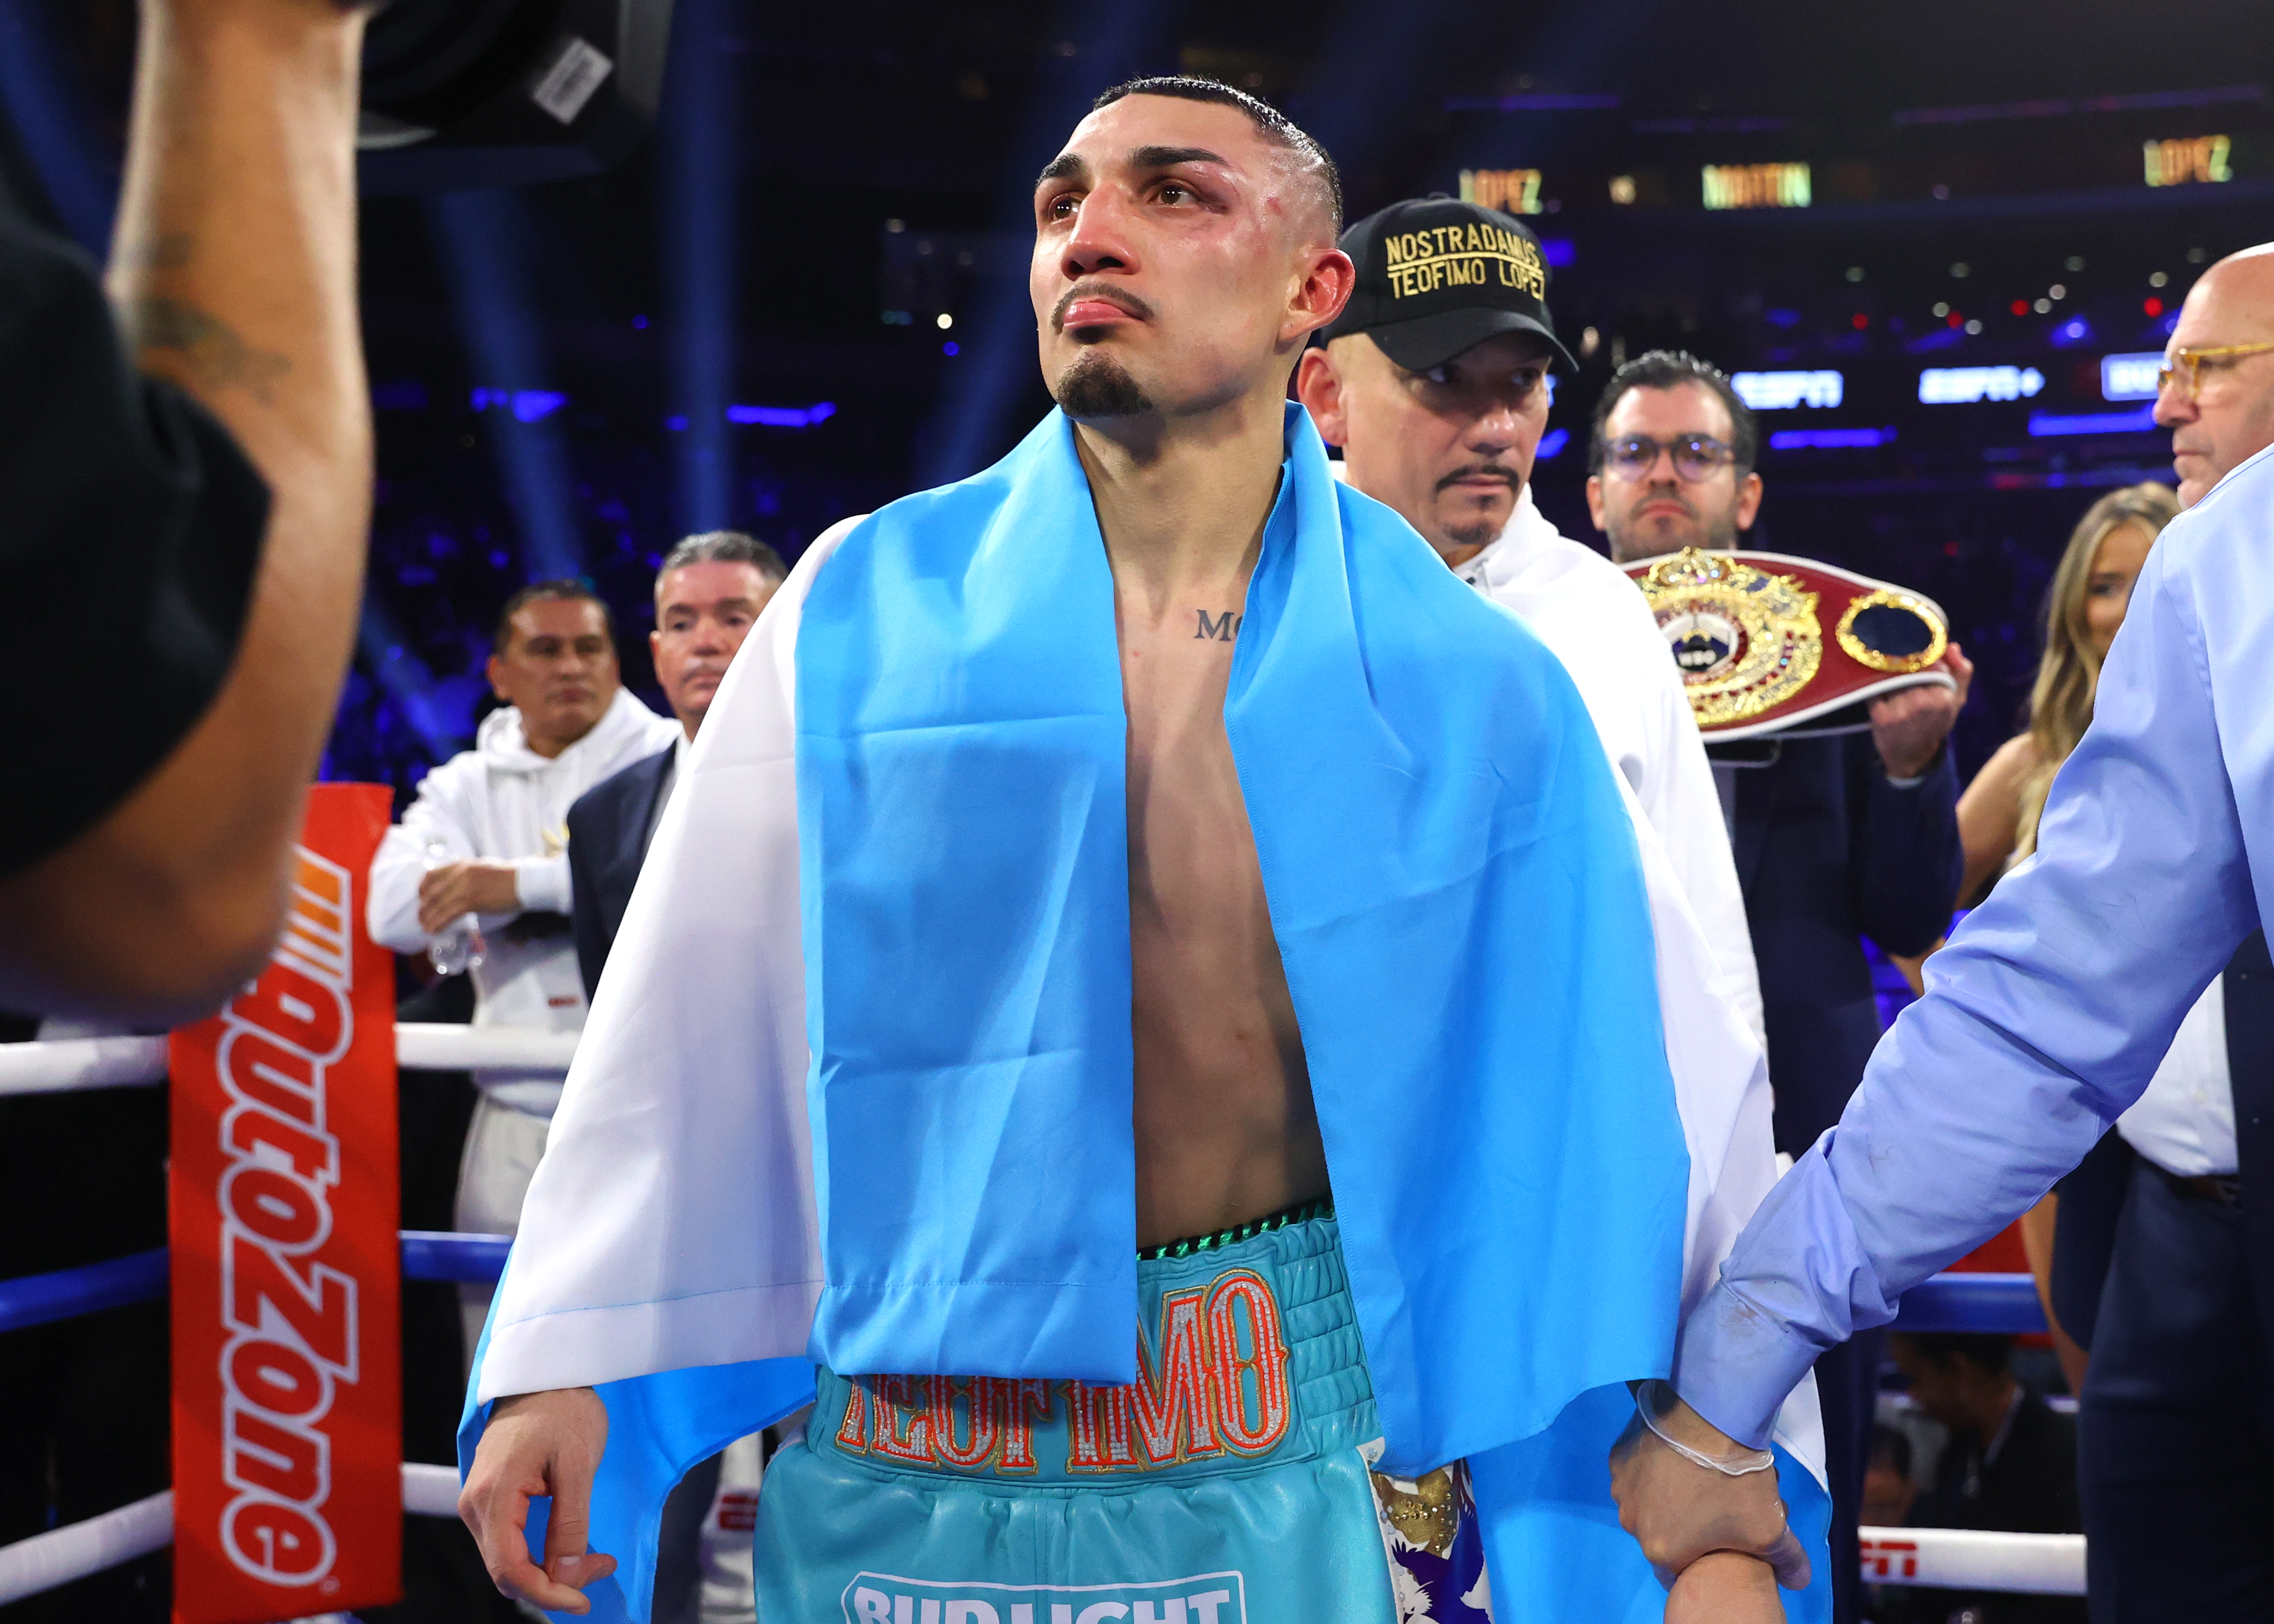 Teofimo Lopez was caught candidly asking his team if he’s “still got it” after his fight with Sandor Martin